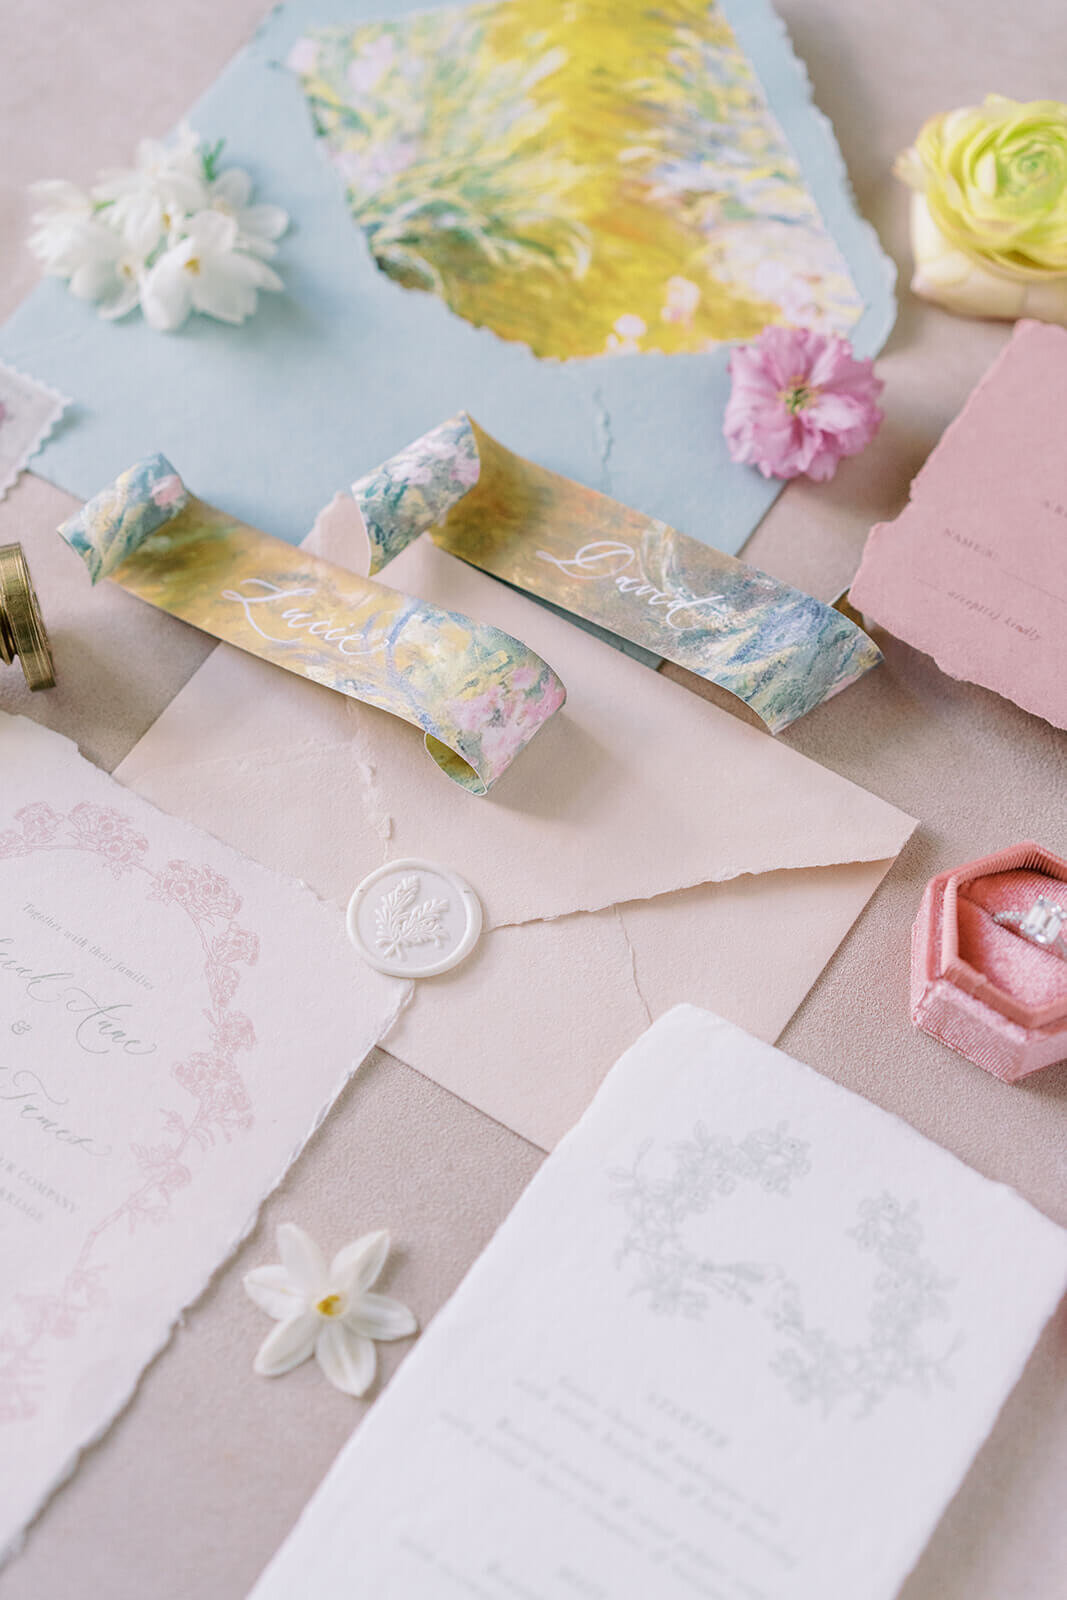 flatlay of bespoke pink wedding stationery on natural paper with blue floral envelope created for westacott weddings and events